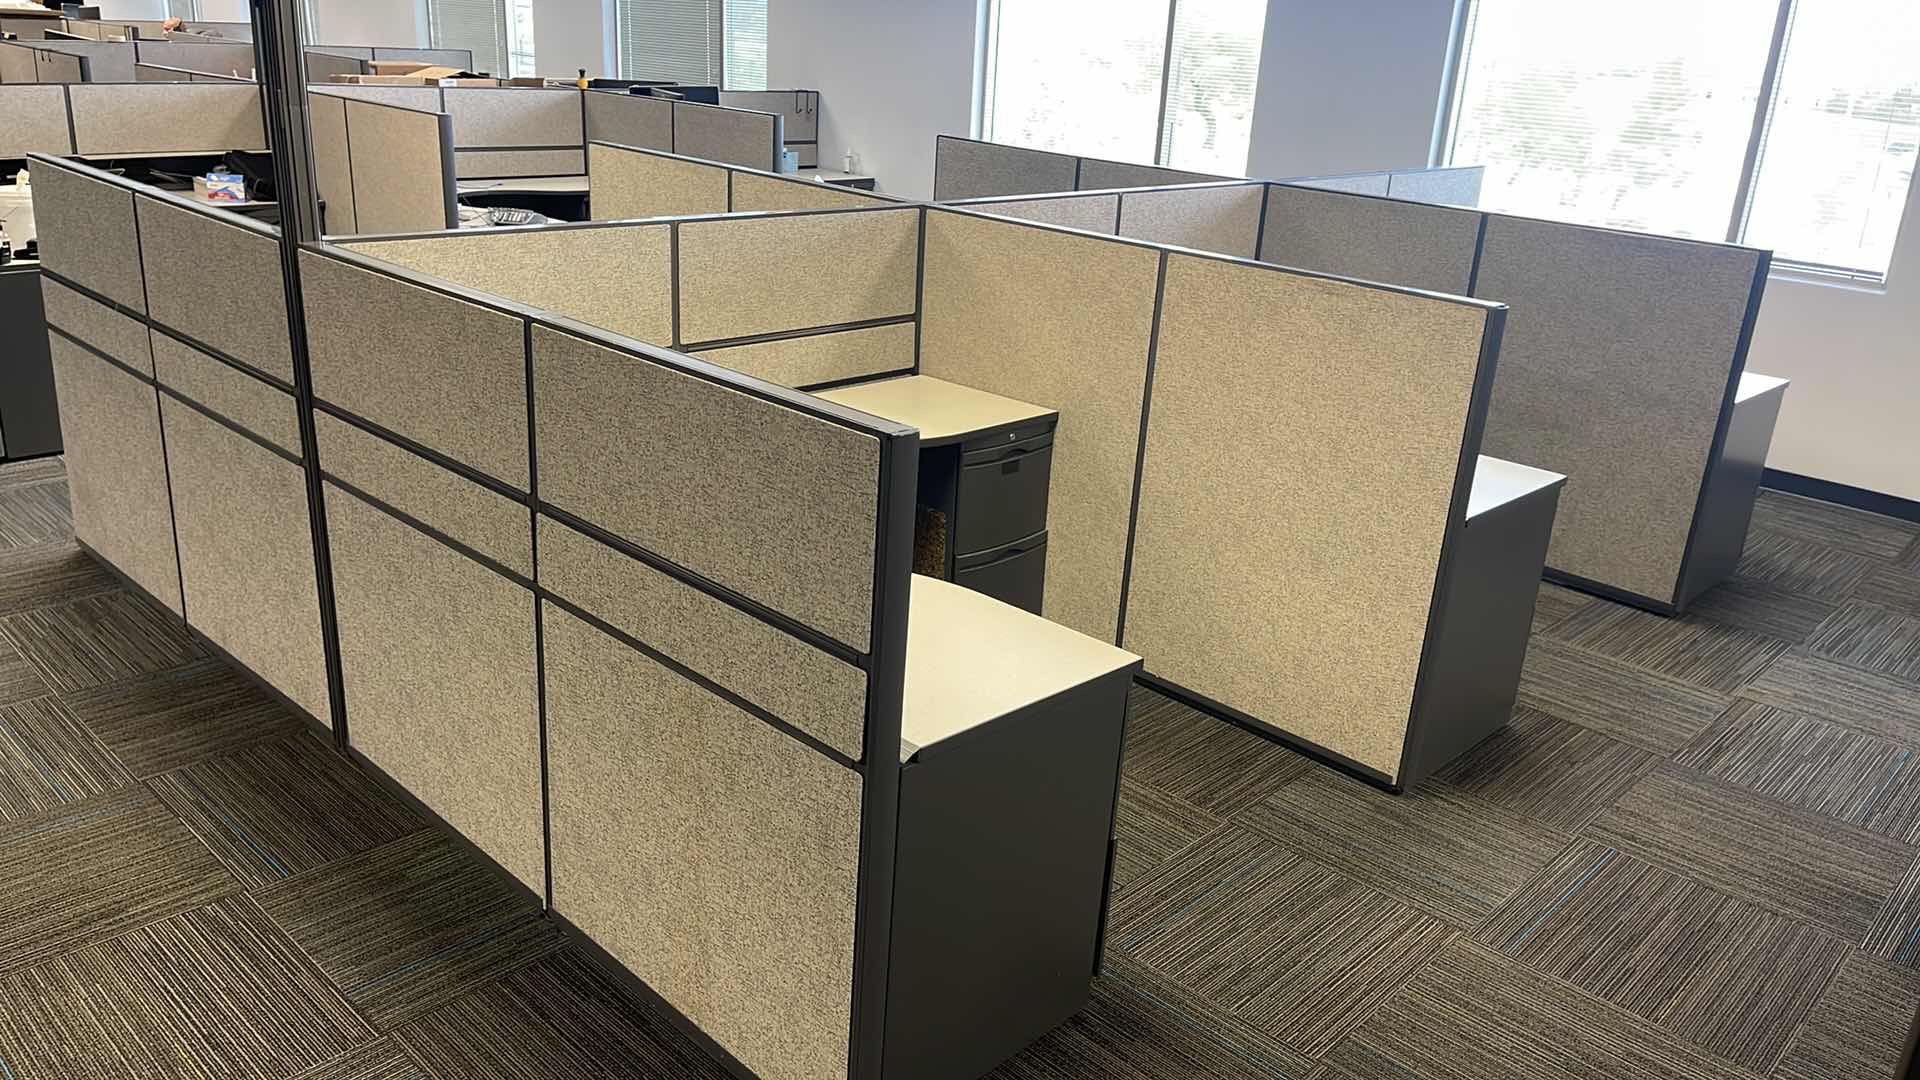 Photo 1 of 6 PC CUBICAL SET W 5 DRAWER MEDAL BASE DESKS 76” X 76” H50” (BUYER TO DISASSEMBLE & REMOVE FROM 2ND STORY OFFICE BUILDING W ELEVATOR)